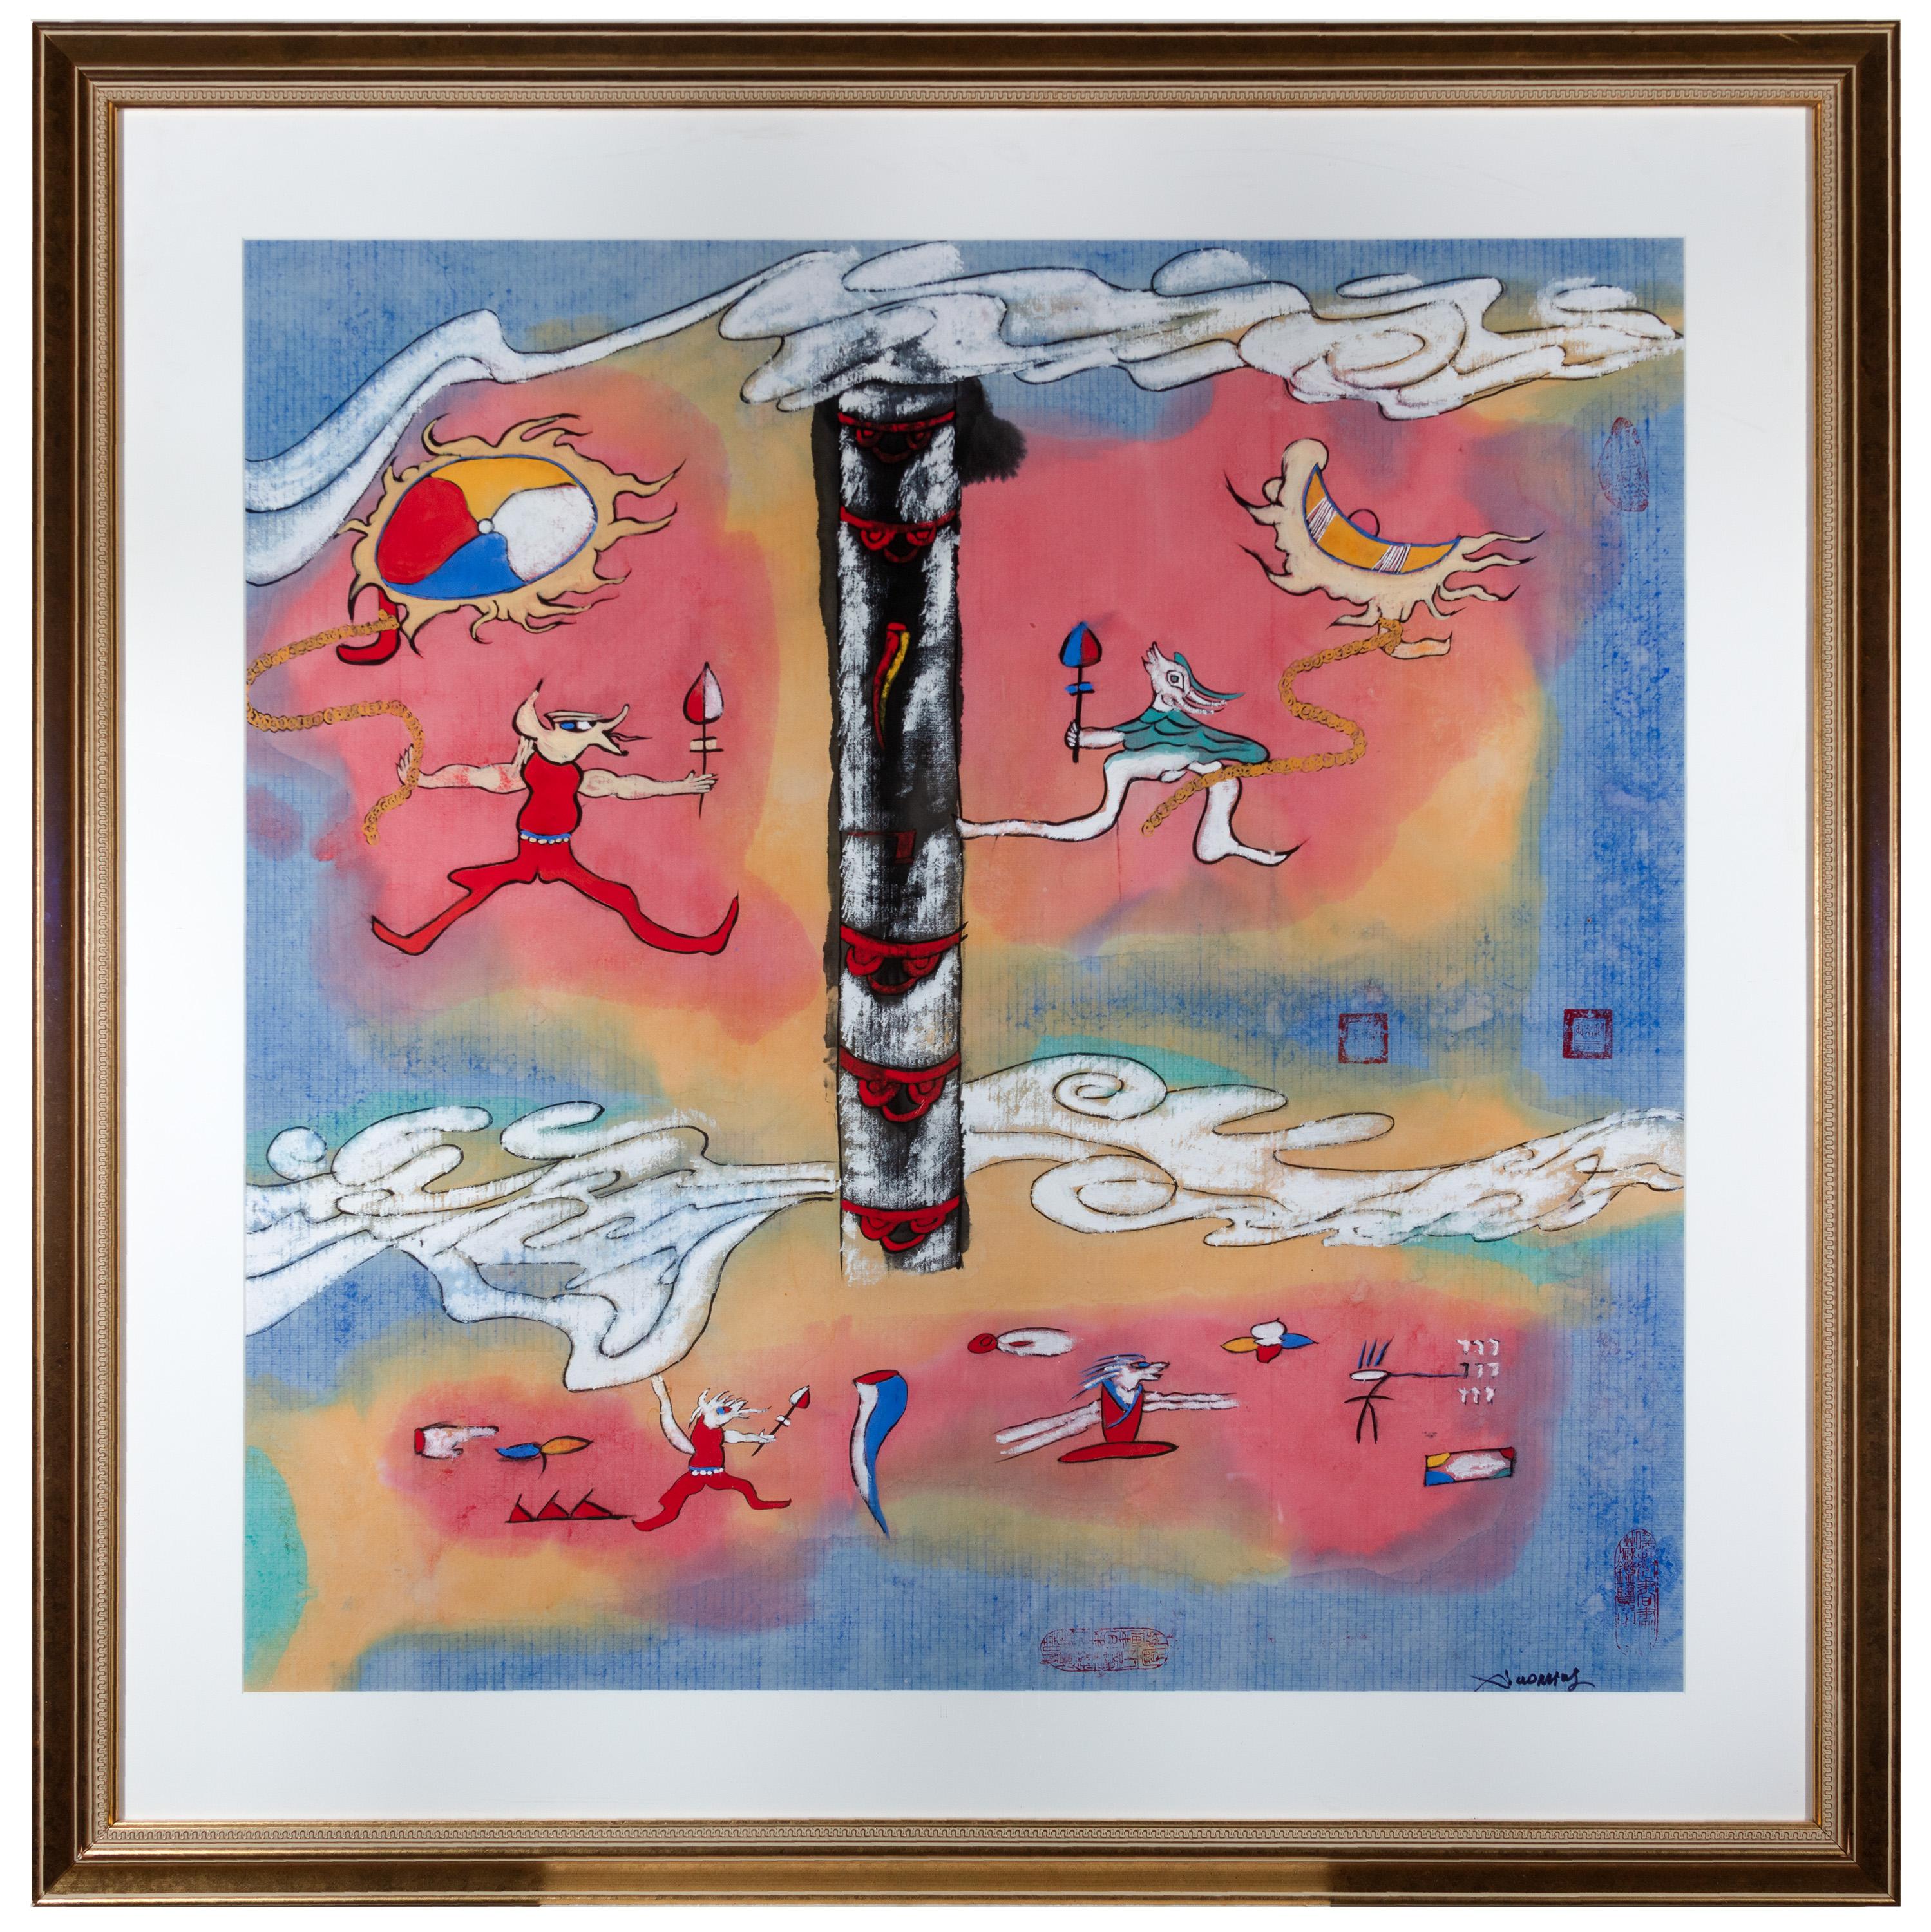 "The East Light, " Symbolic Mixed Media Painting on Paper, Signed - Mixed Media Art by Xiao Ming